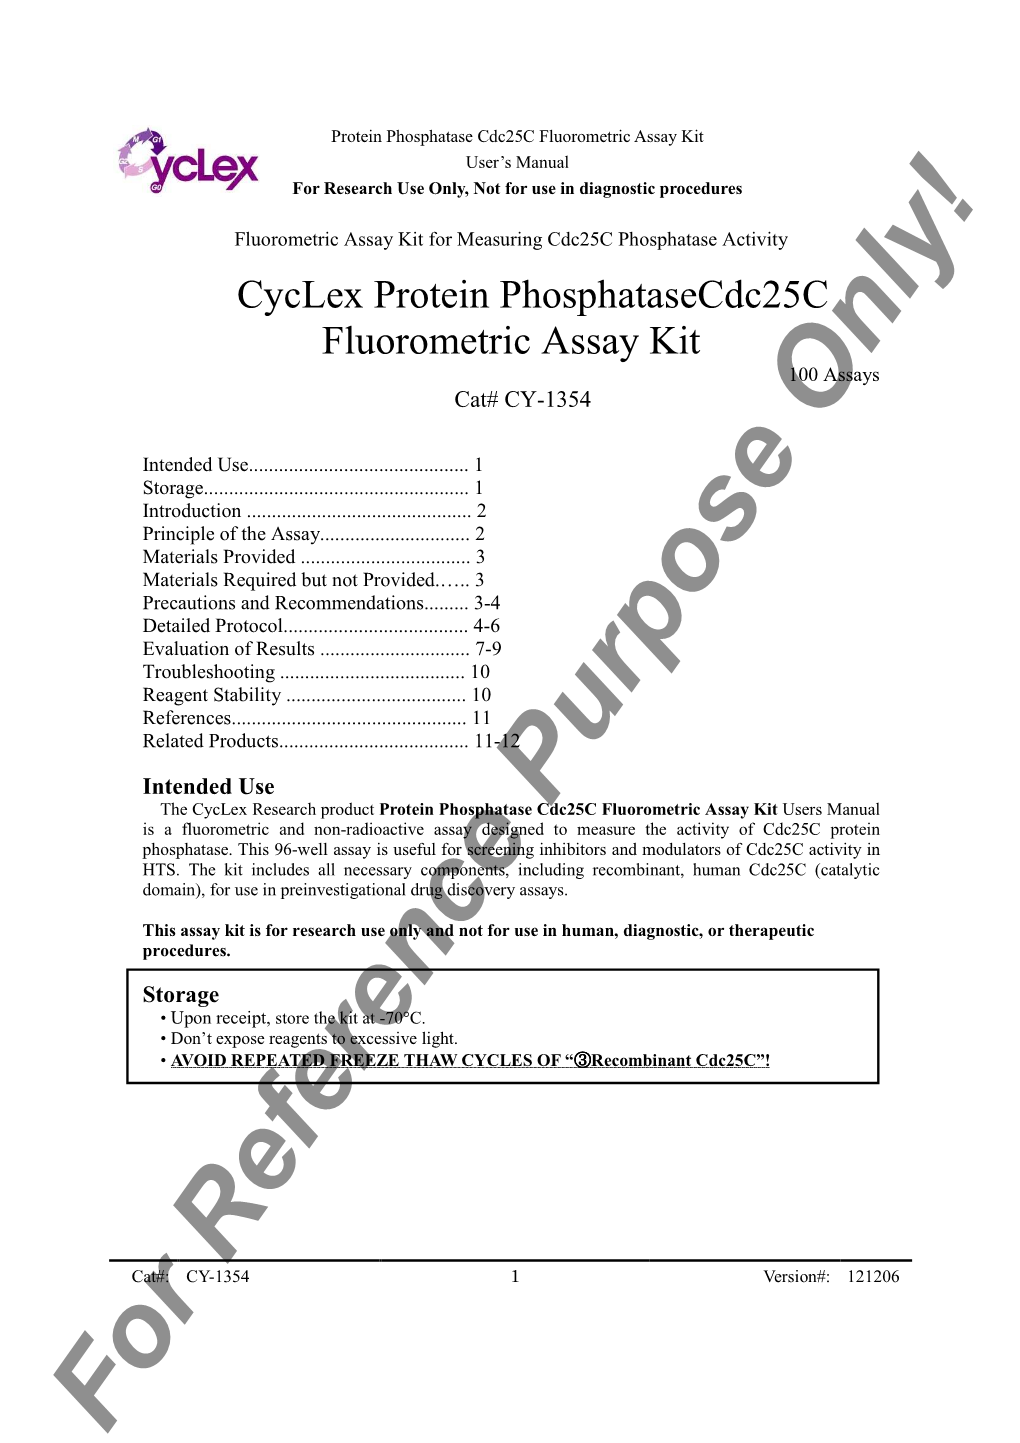 For Reference Purpose Only! Protein Phosphatase Cdc25c Fluorometric Assay Kit User’S Manual for Research Use Only, Not for Use in Diagnostic Procedures